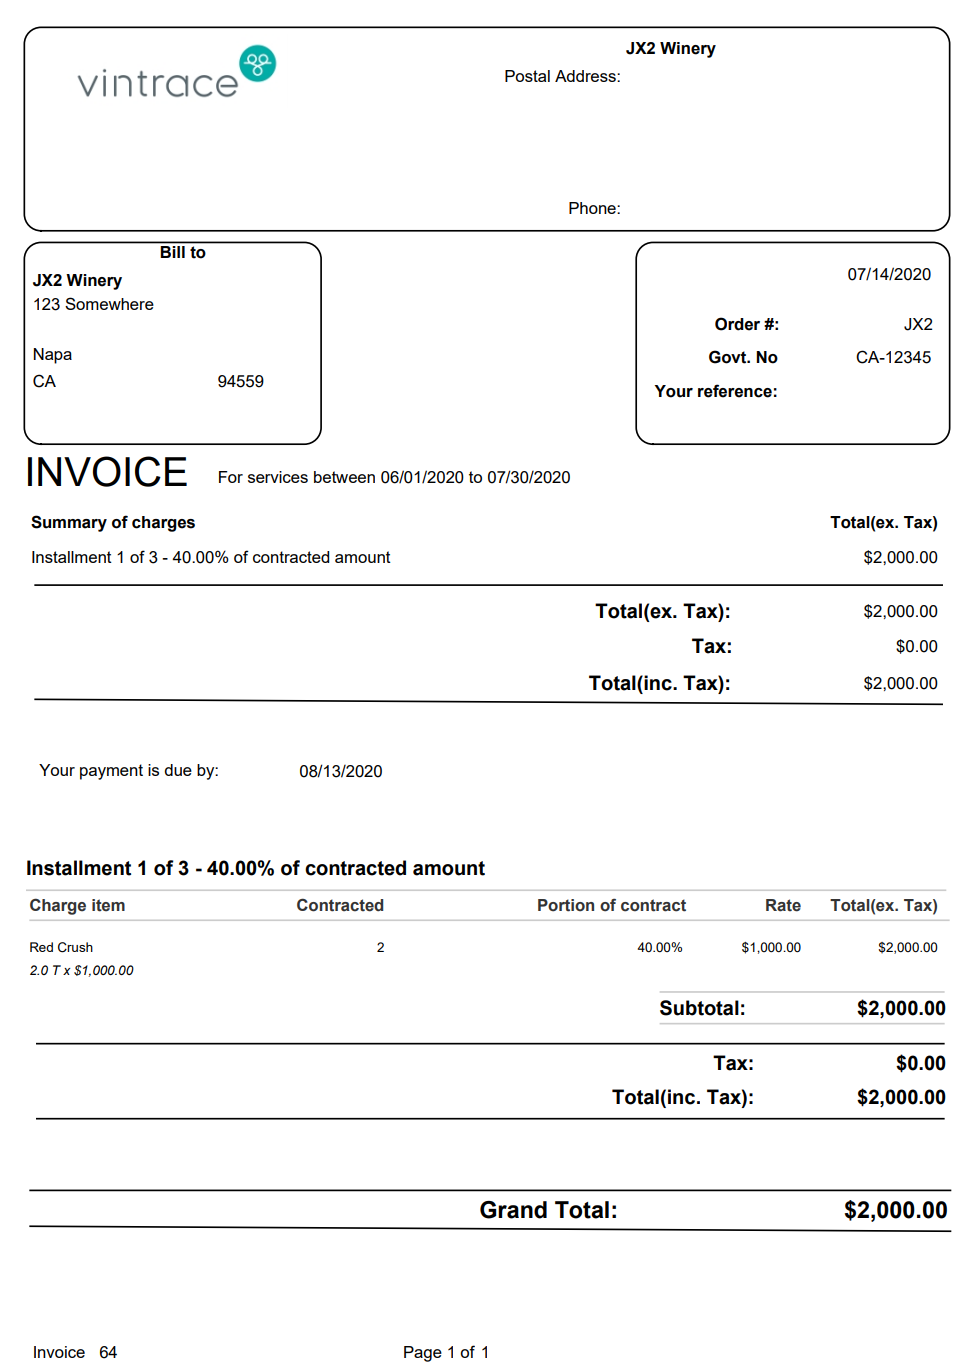 Printed_Invoice_-_Installment_20200714.png